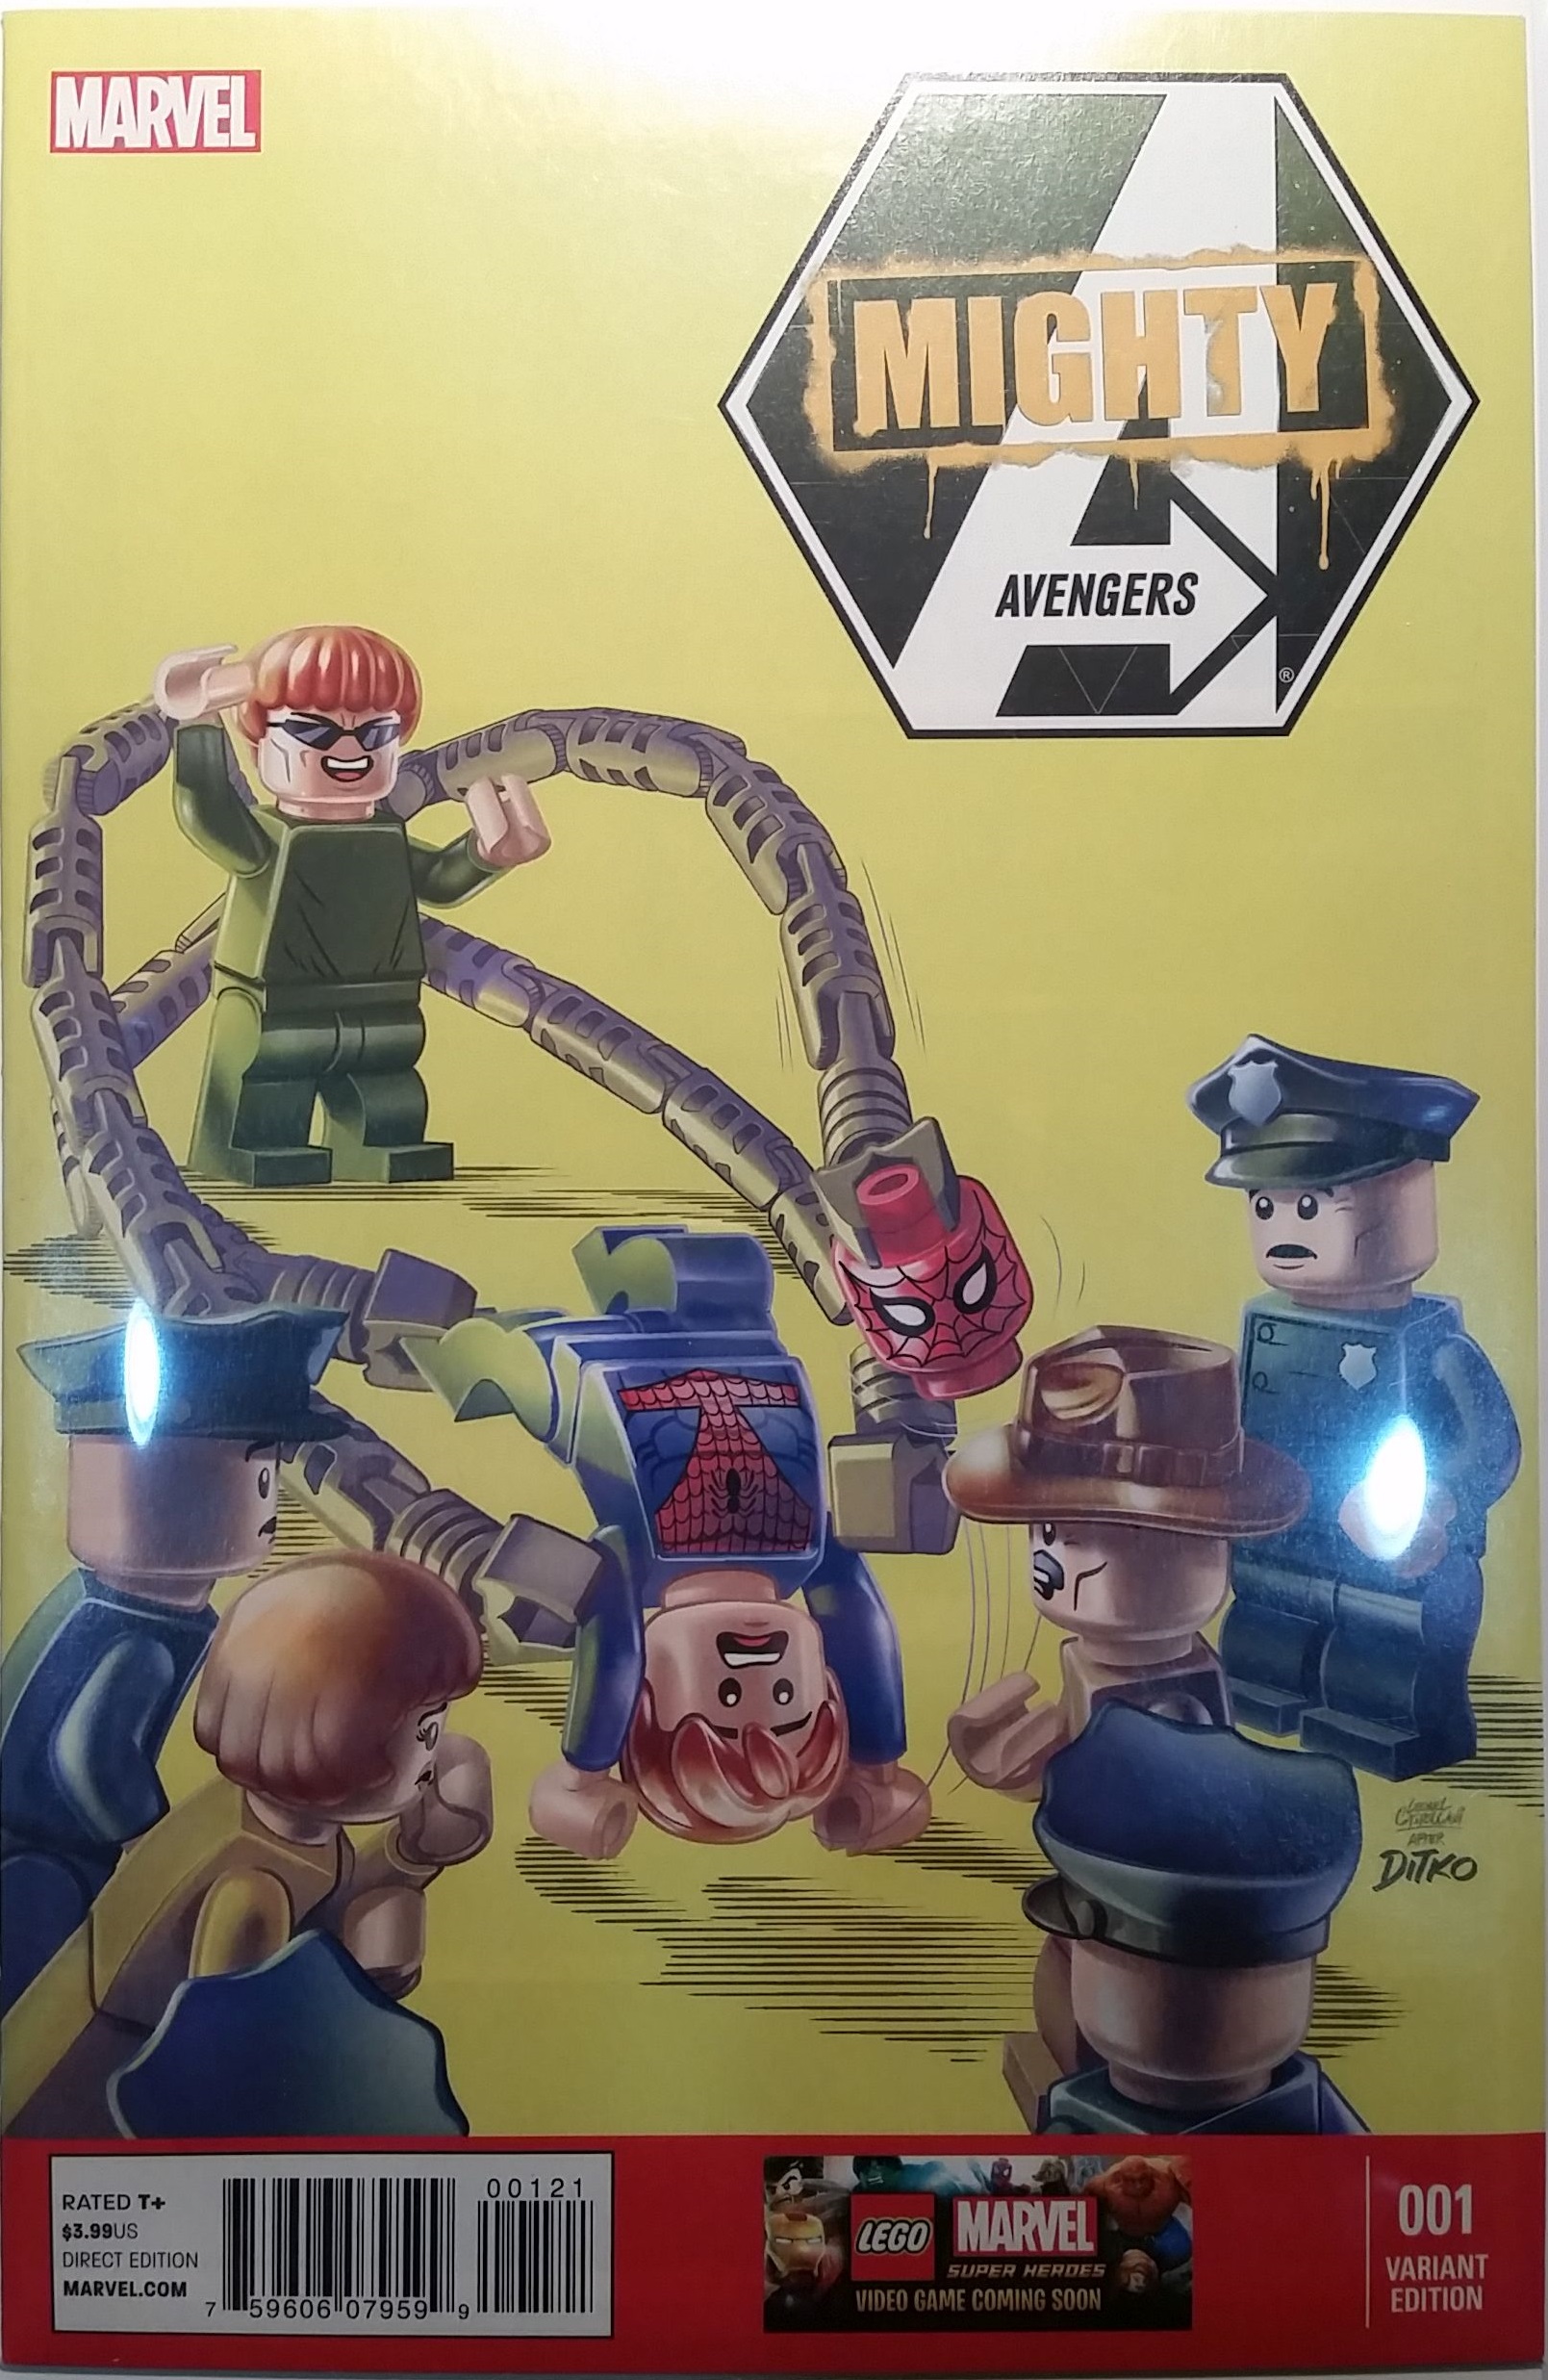 Lego Minifigures in Comics and Comic Book Covers Recreated ...